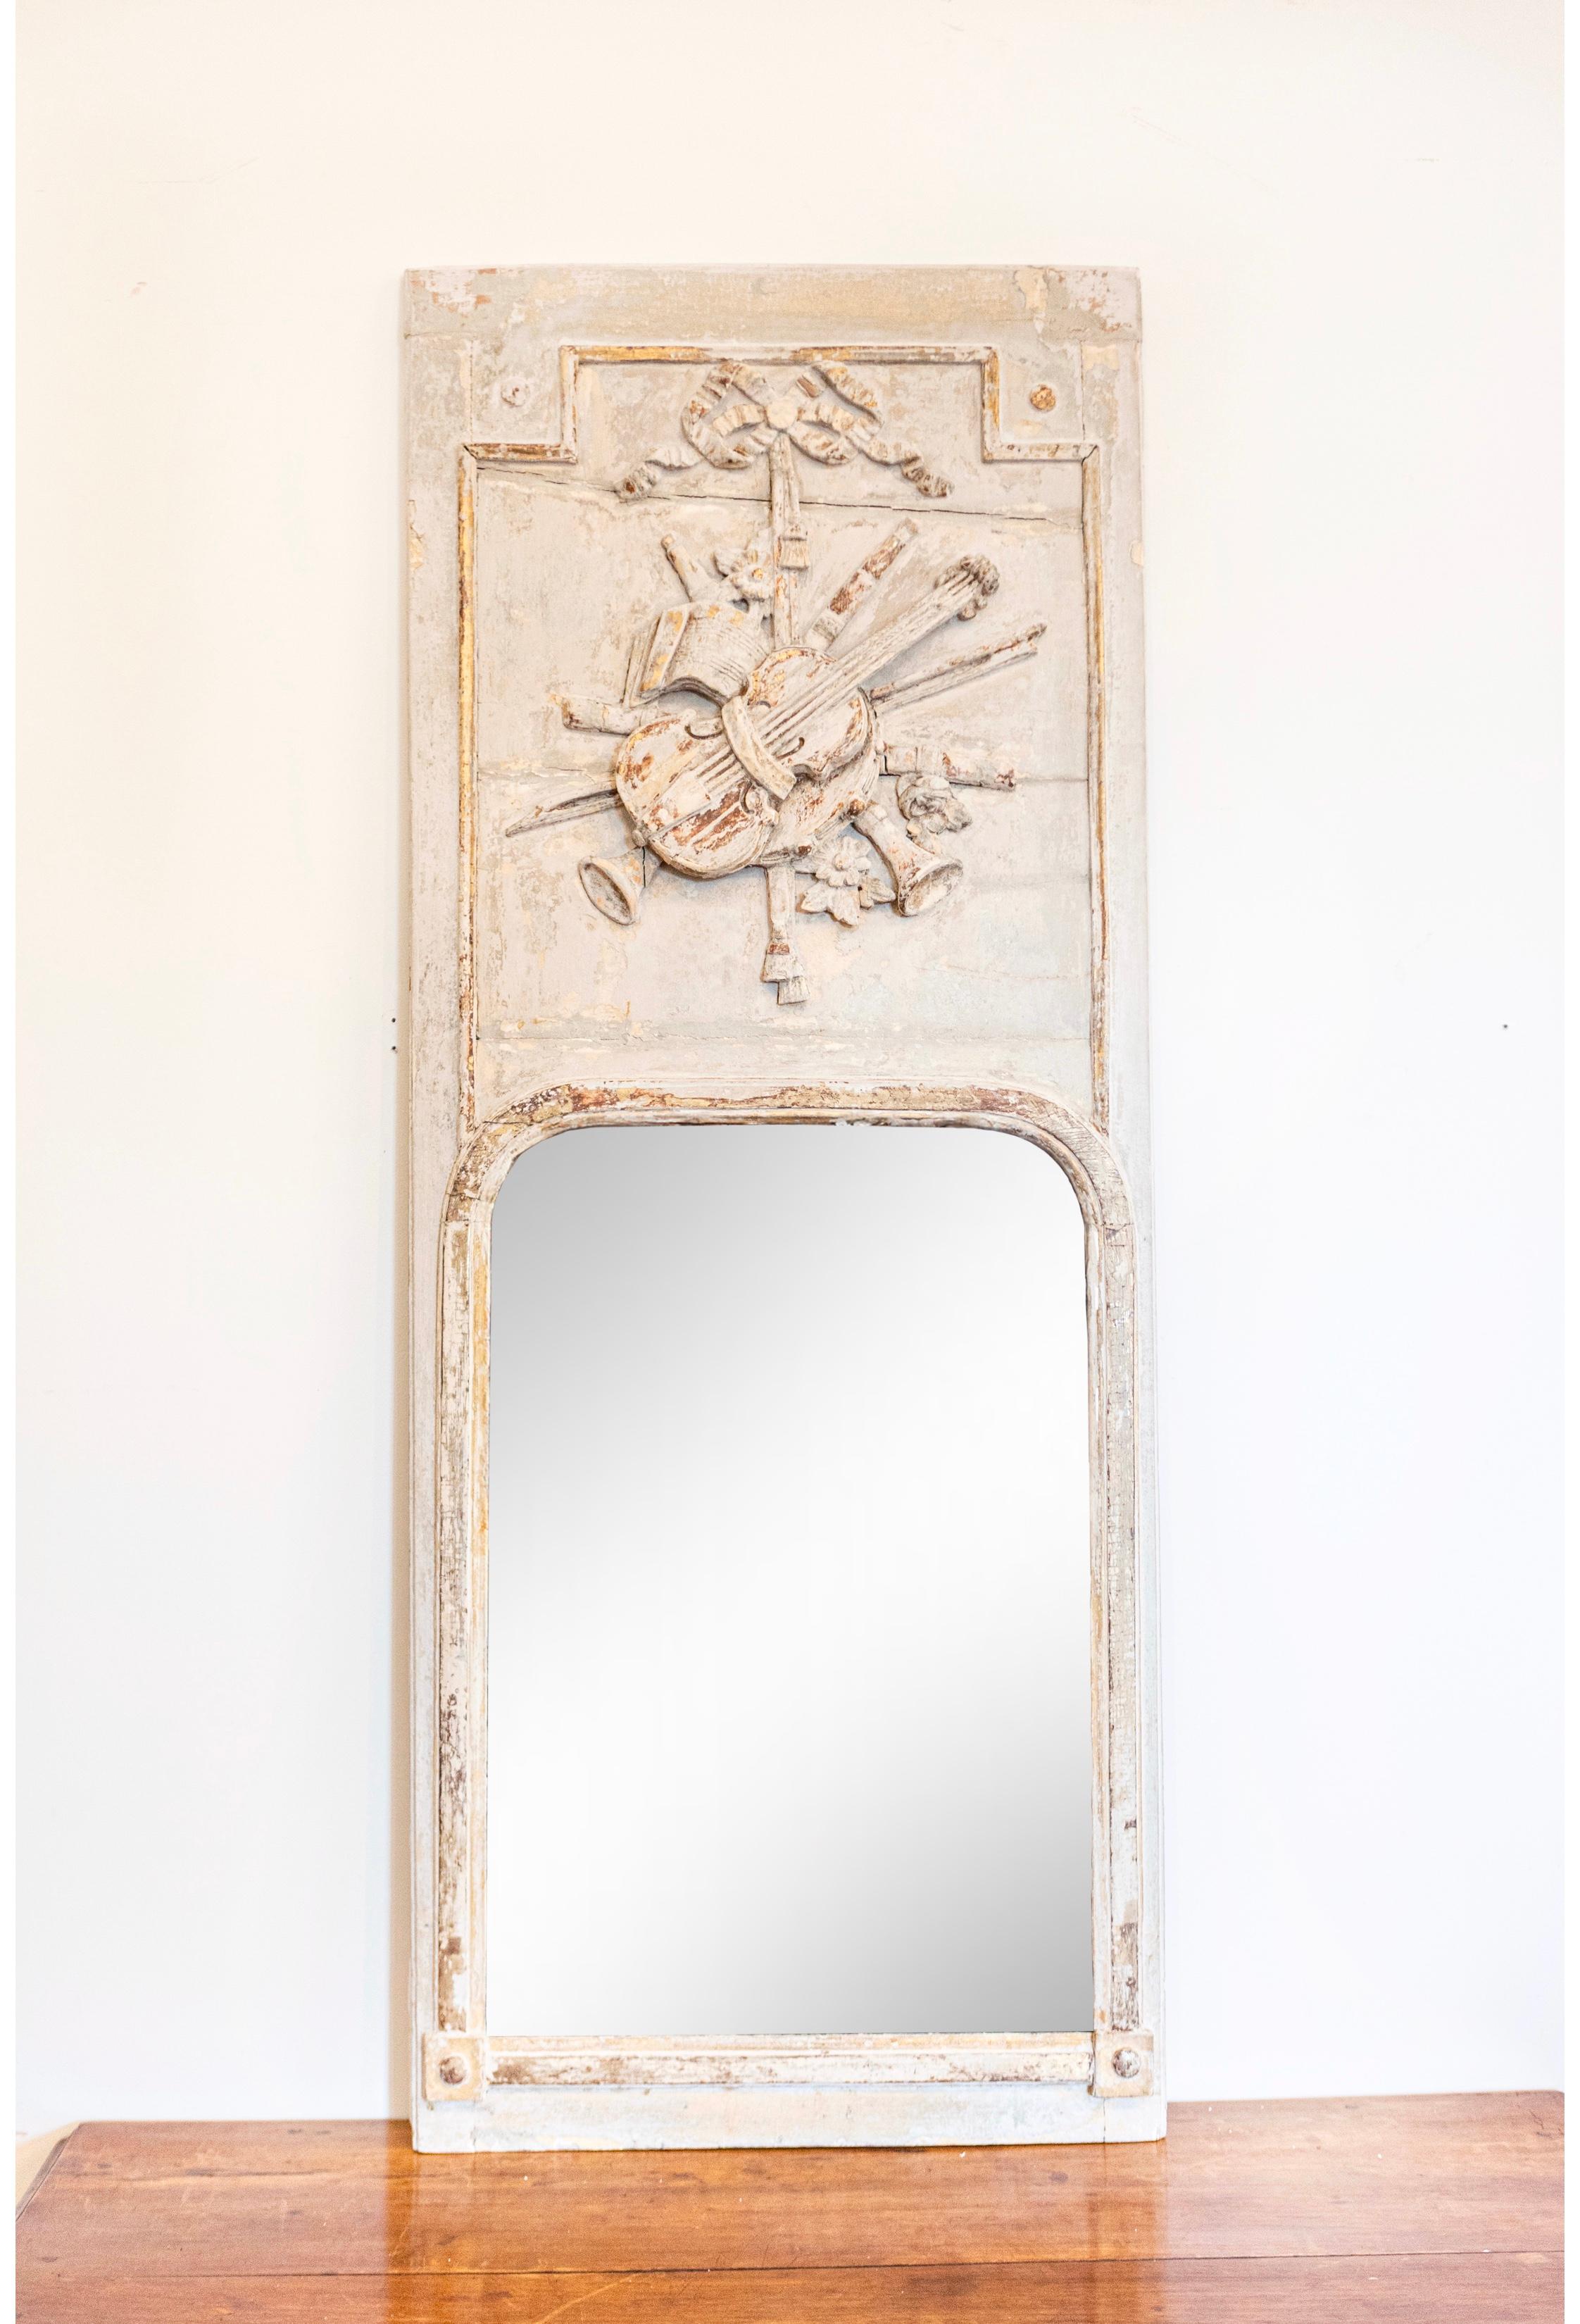 A French Louis XVI period trumeau mirror from circa 1790 with carved Liberal Arts Allegory, antique off white painted finish and gilt accents. This captivating French Louis XVI period trumeau mirror, dating back to circa 1790, is an emblem of